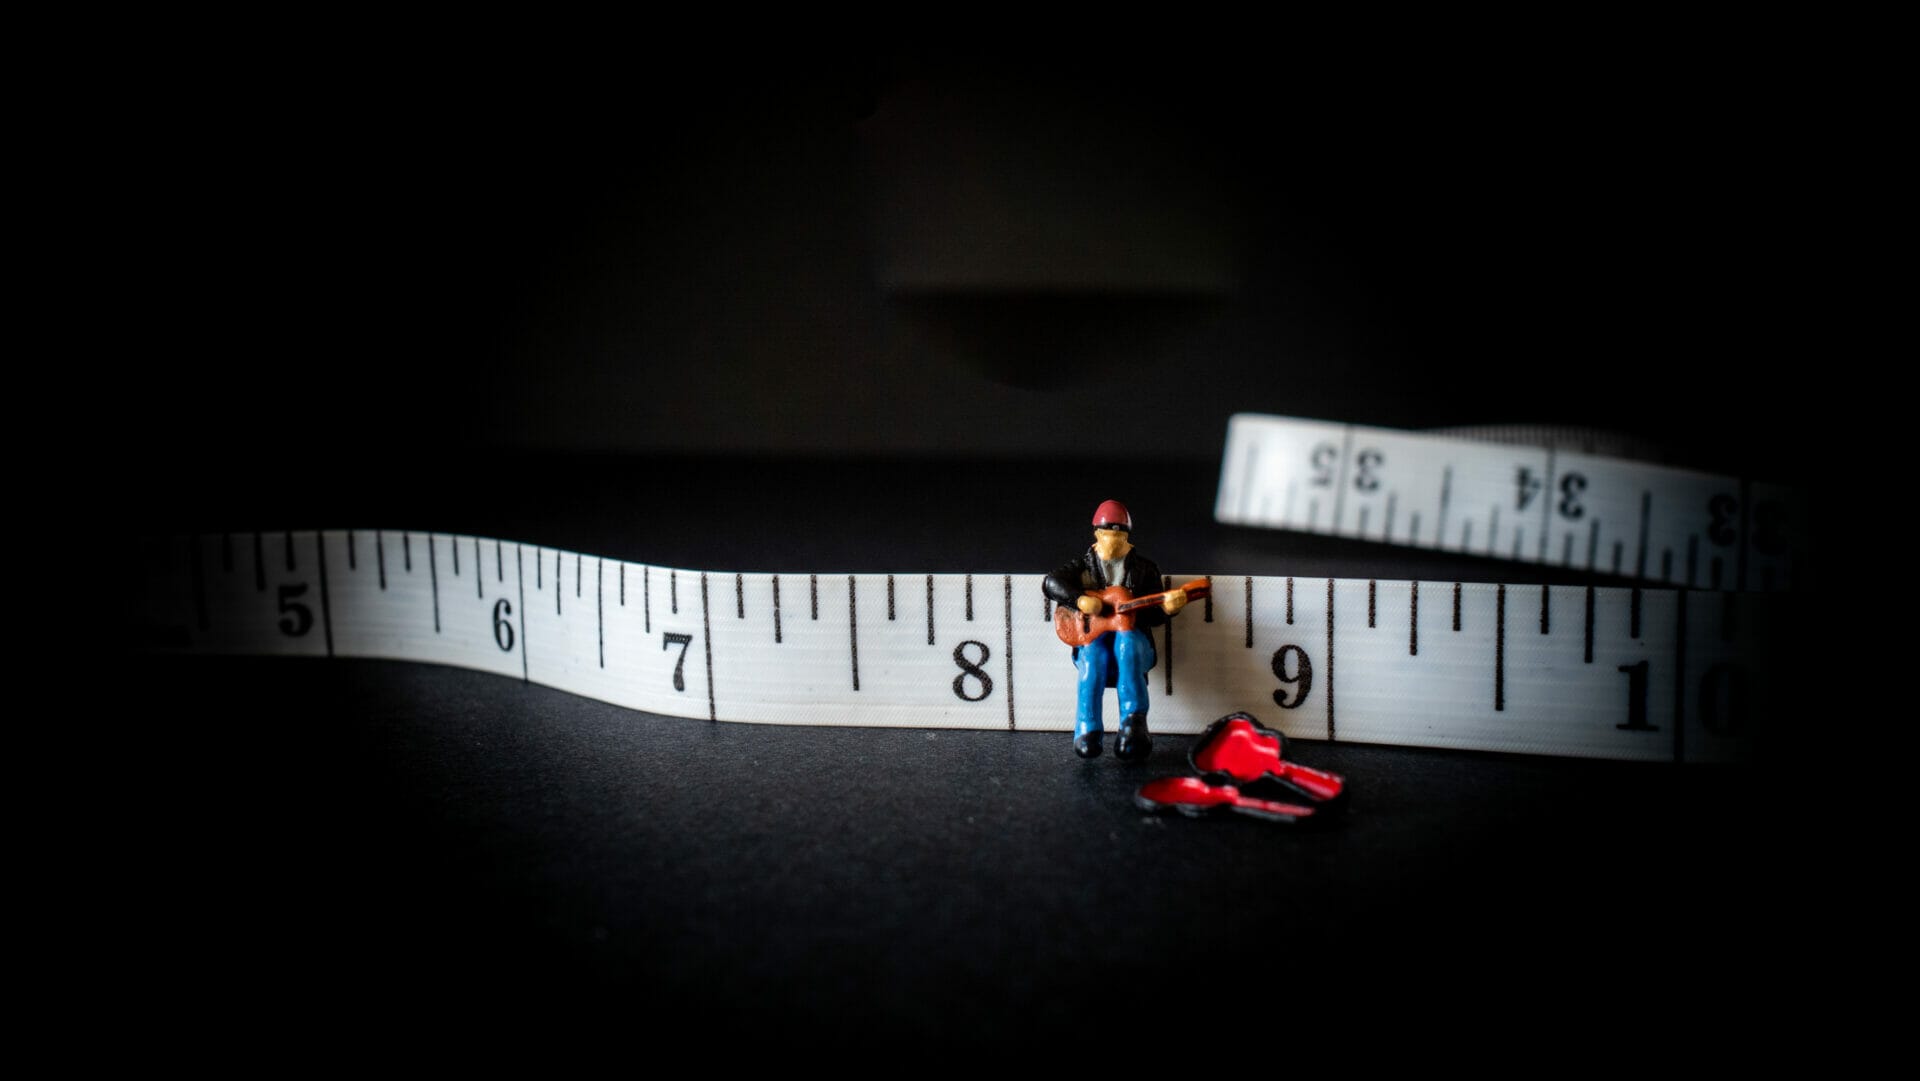 Creative photo showing a miniature model person playing a guitar on a tape measure.